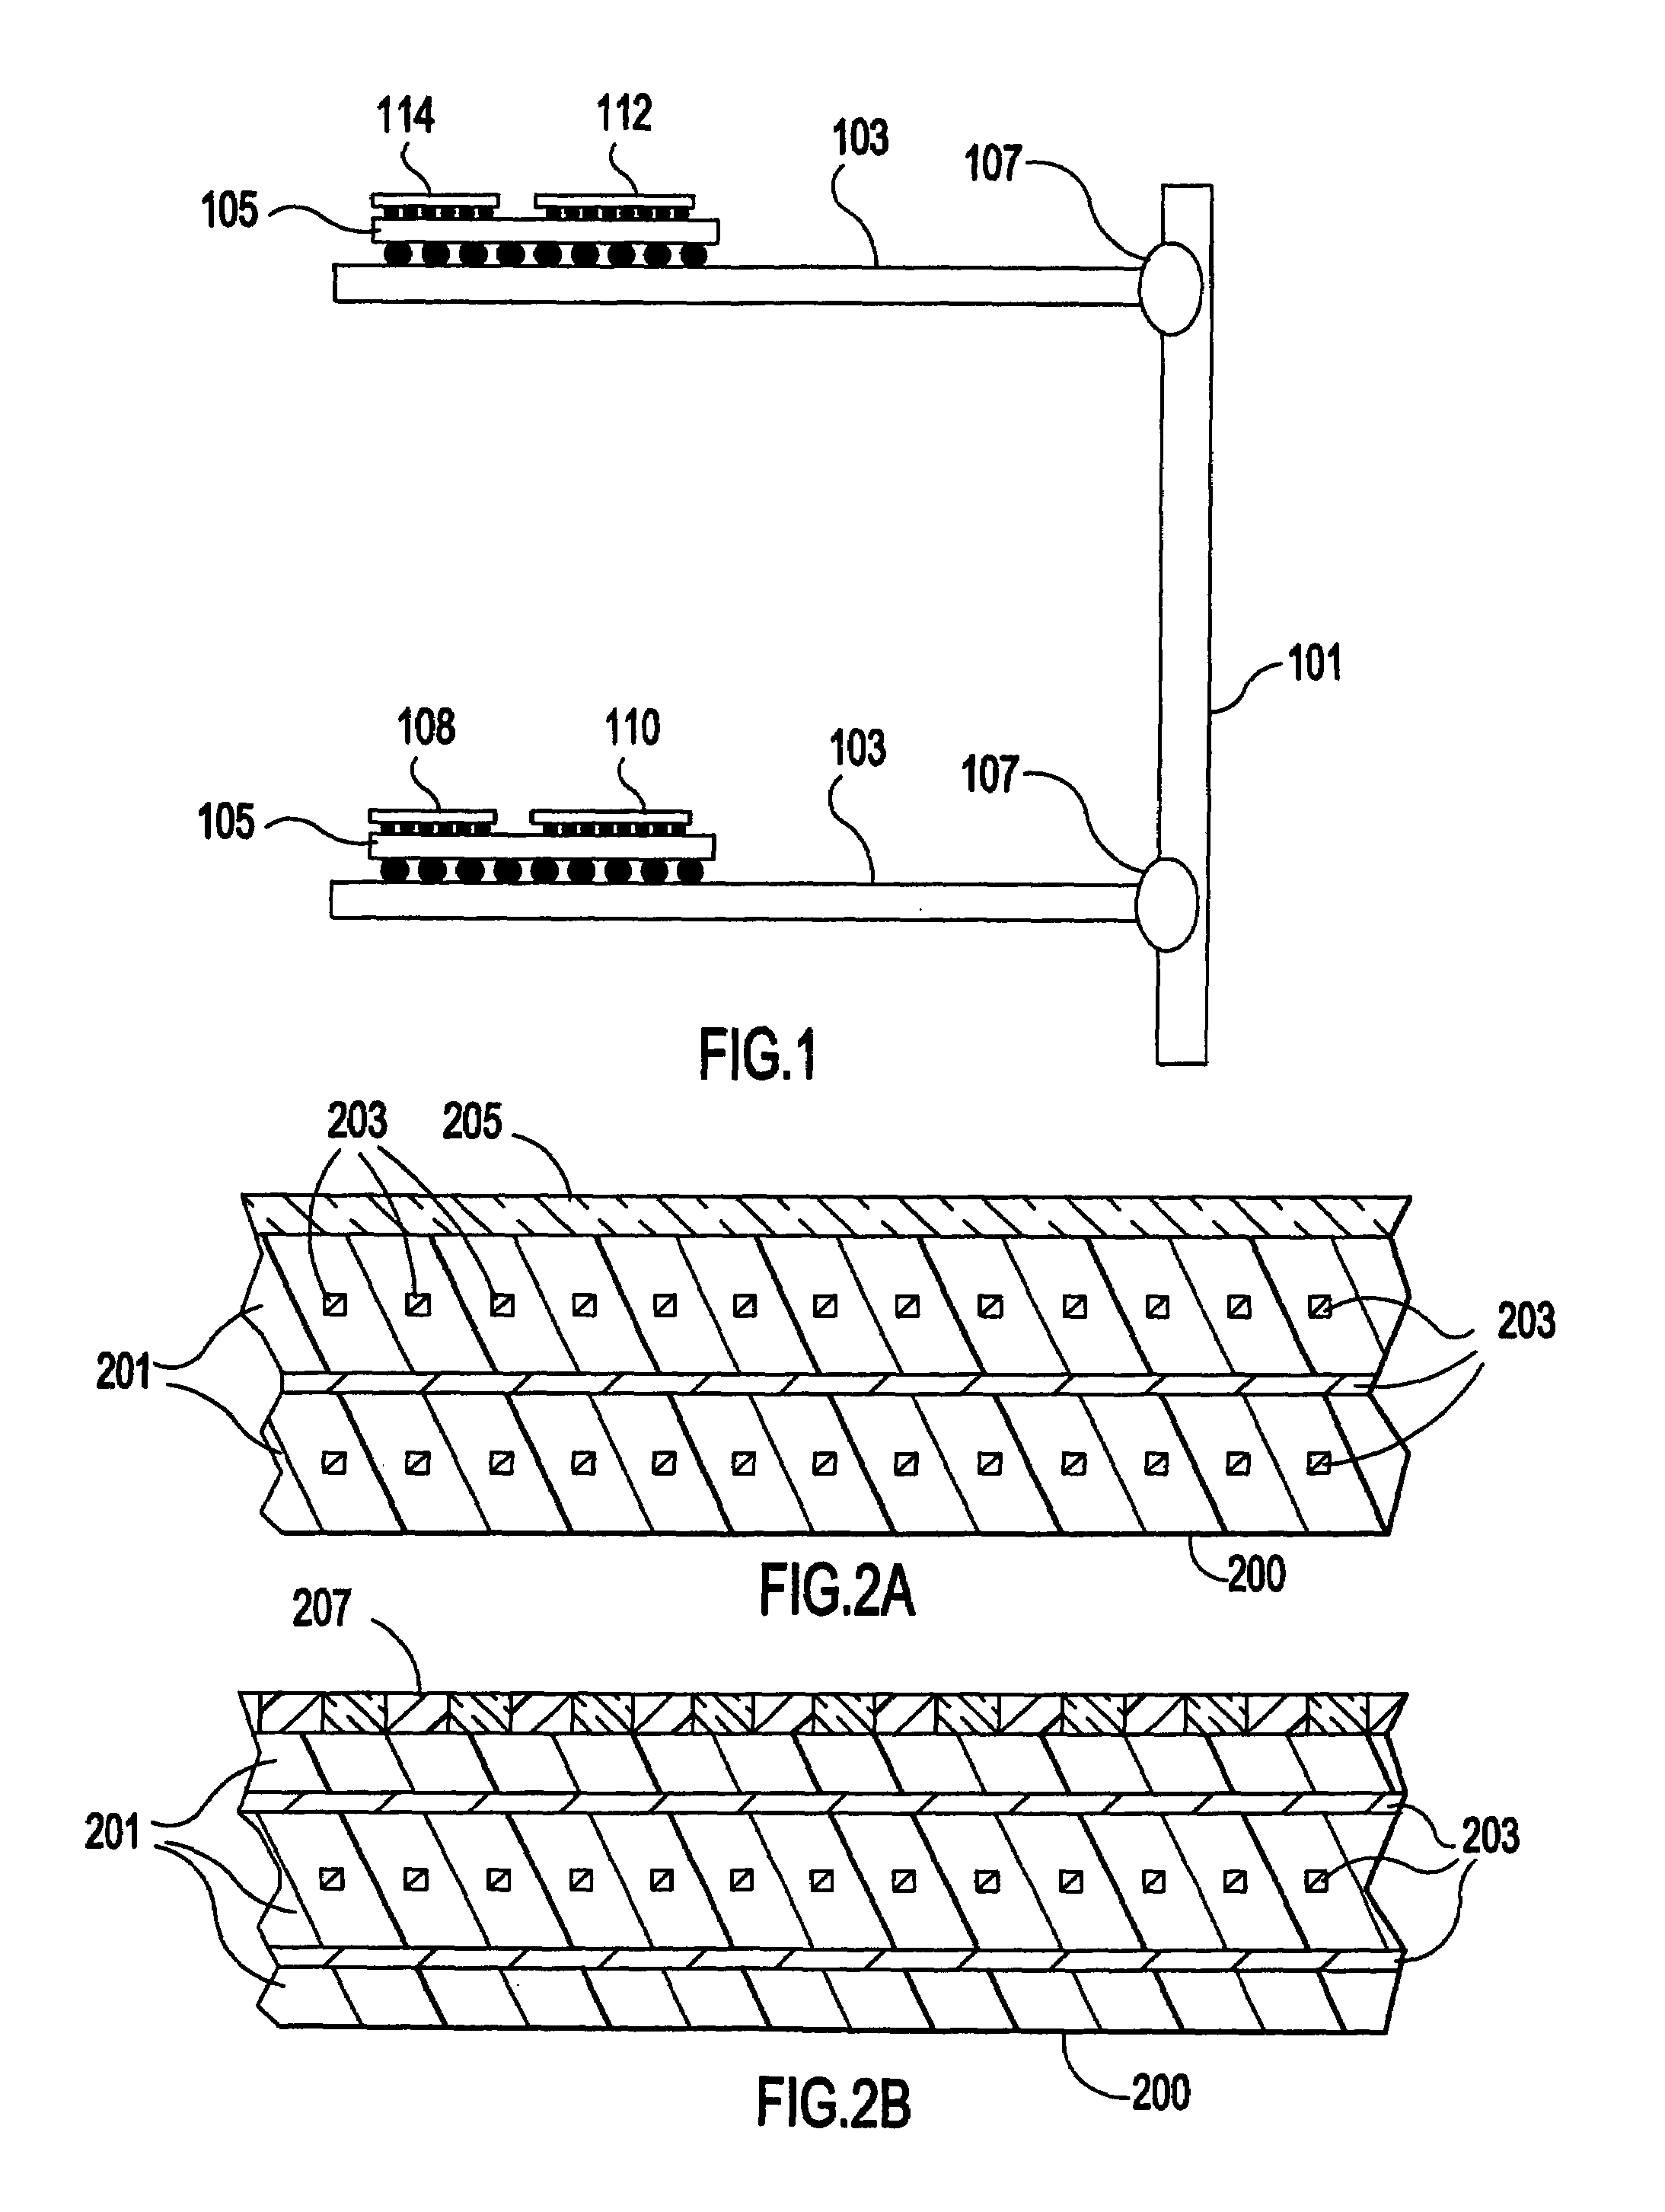 Backplane assembly with board to board optical interconnections